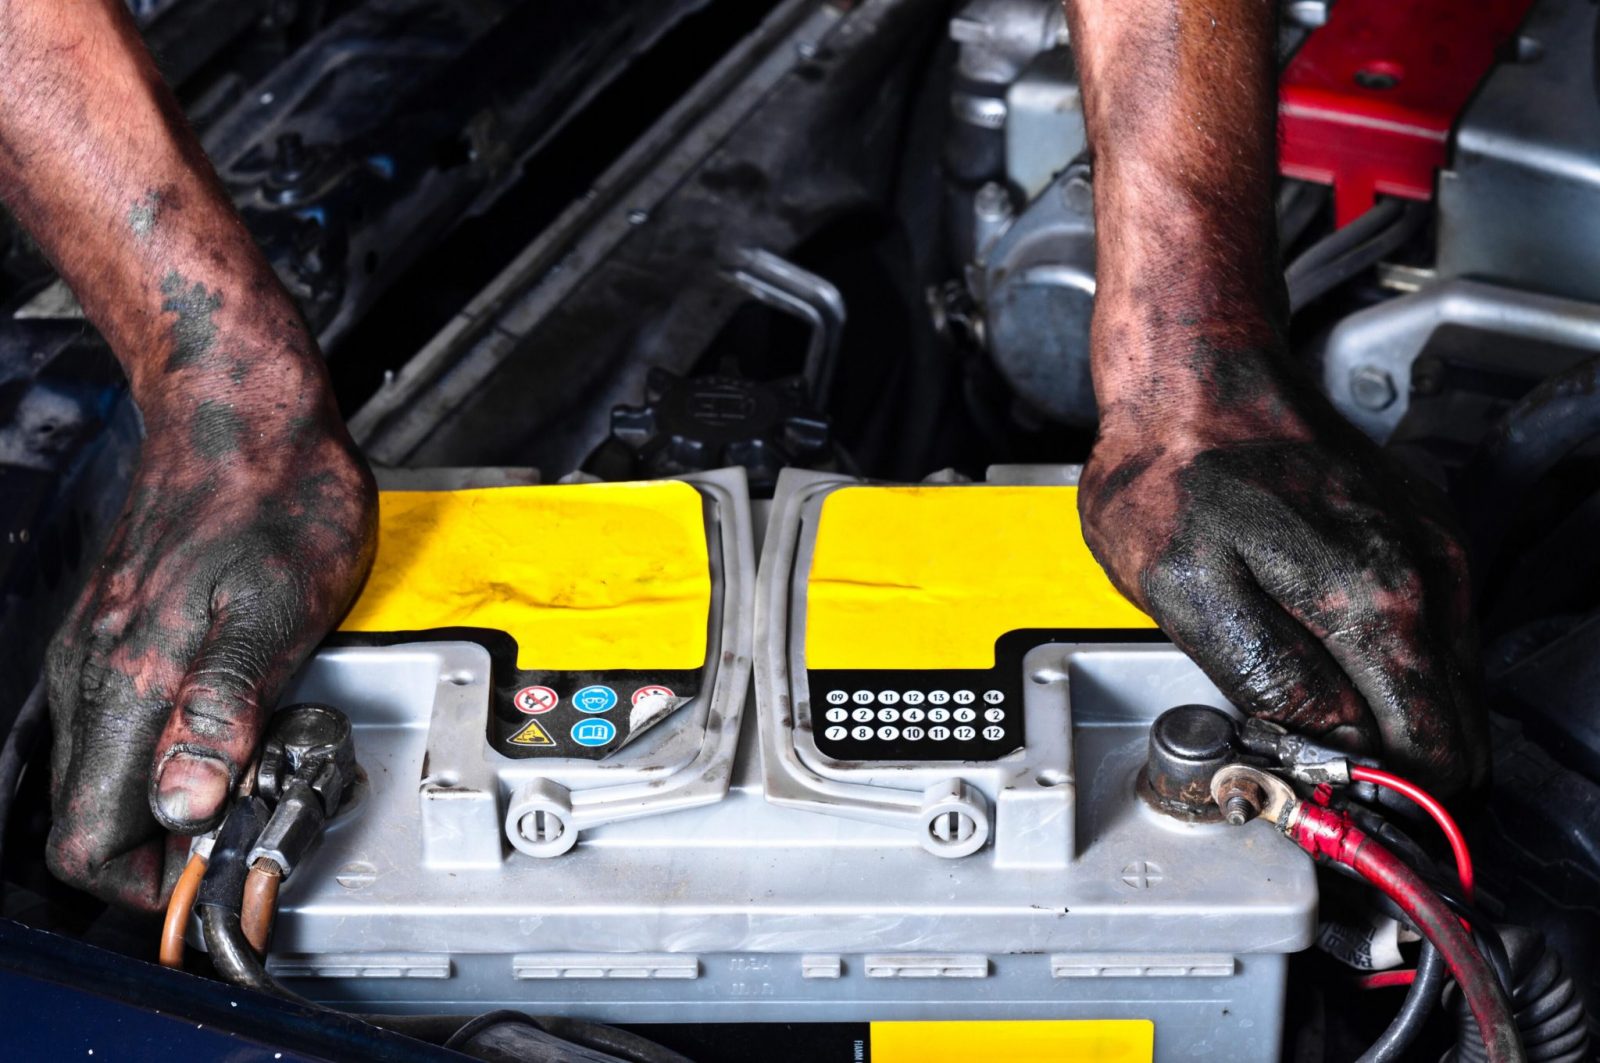 How does a car battery work?